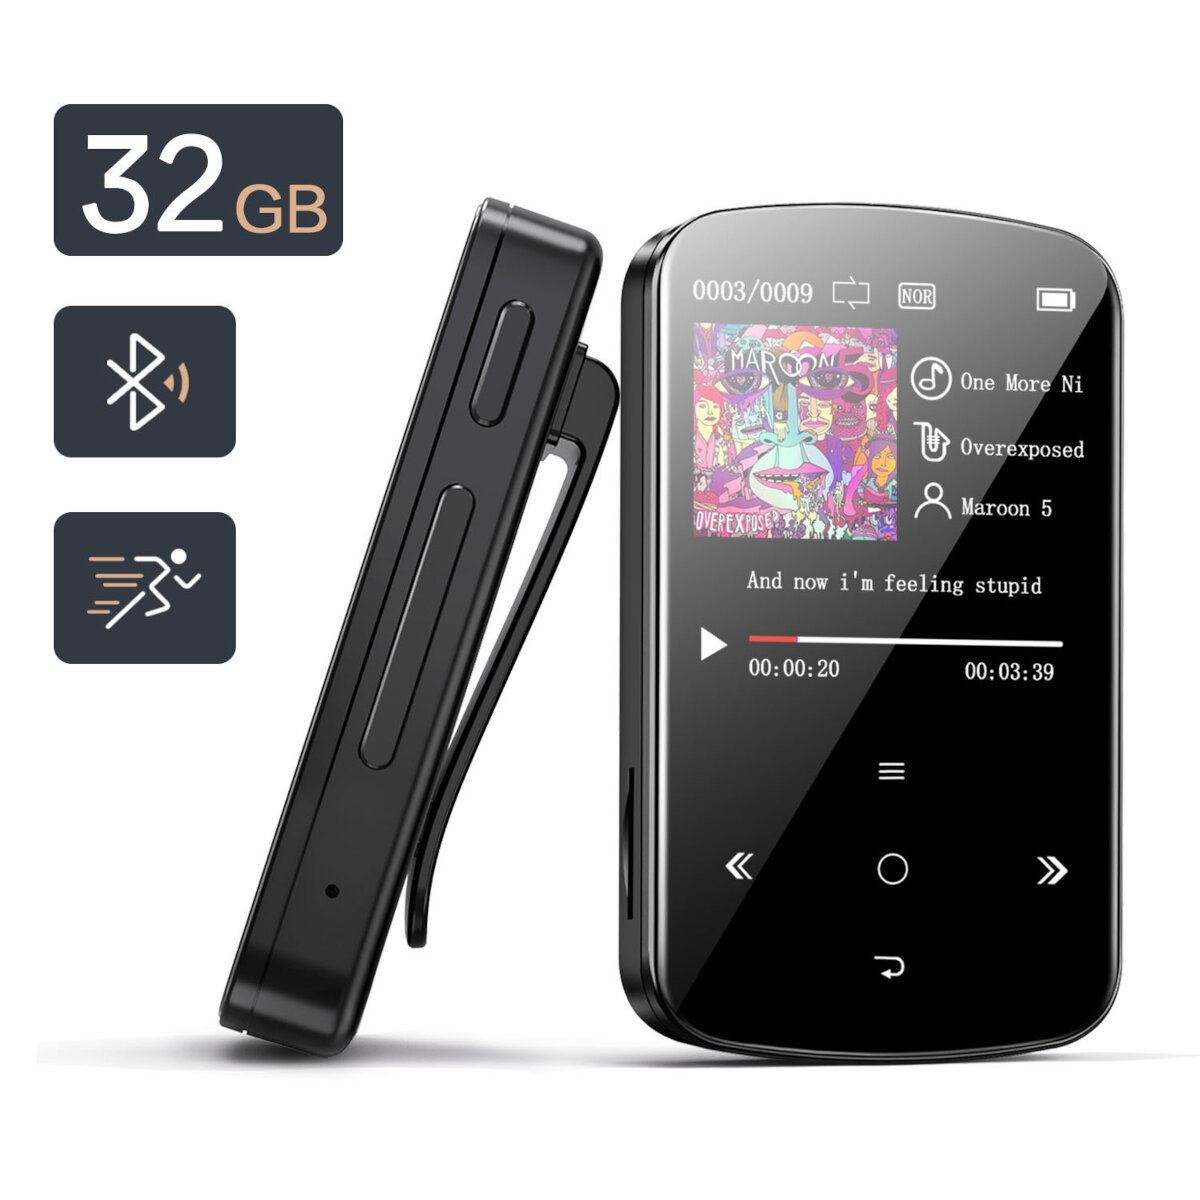 BENJIE M9 32GB Mini USB MP3 Sport Media Player 1.5 inch Color Screen Wireless Bluetooth 4.2 with Portable Clip TF Card Slot